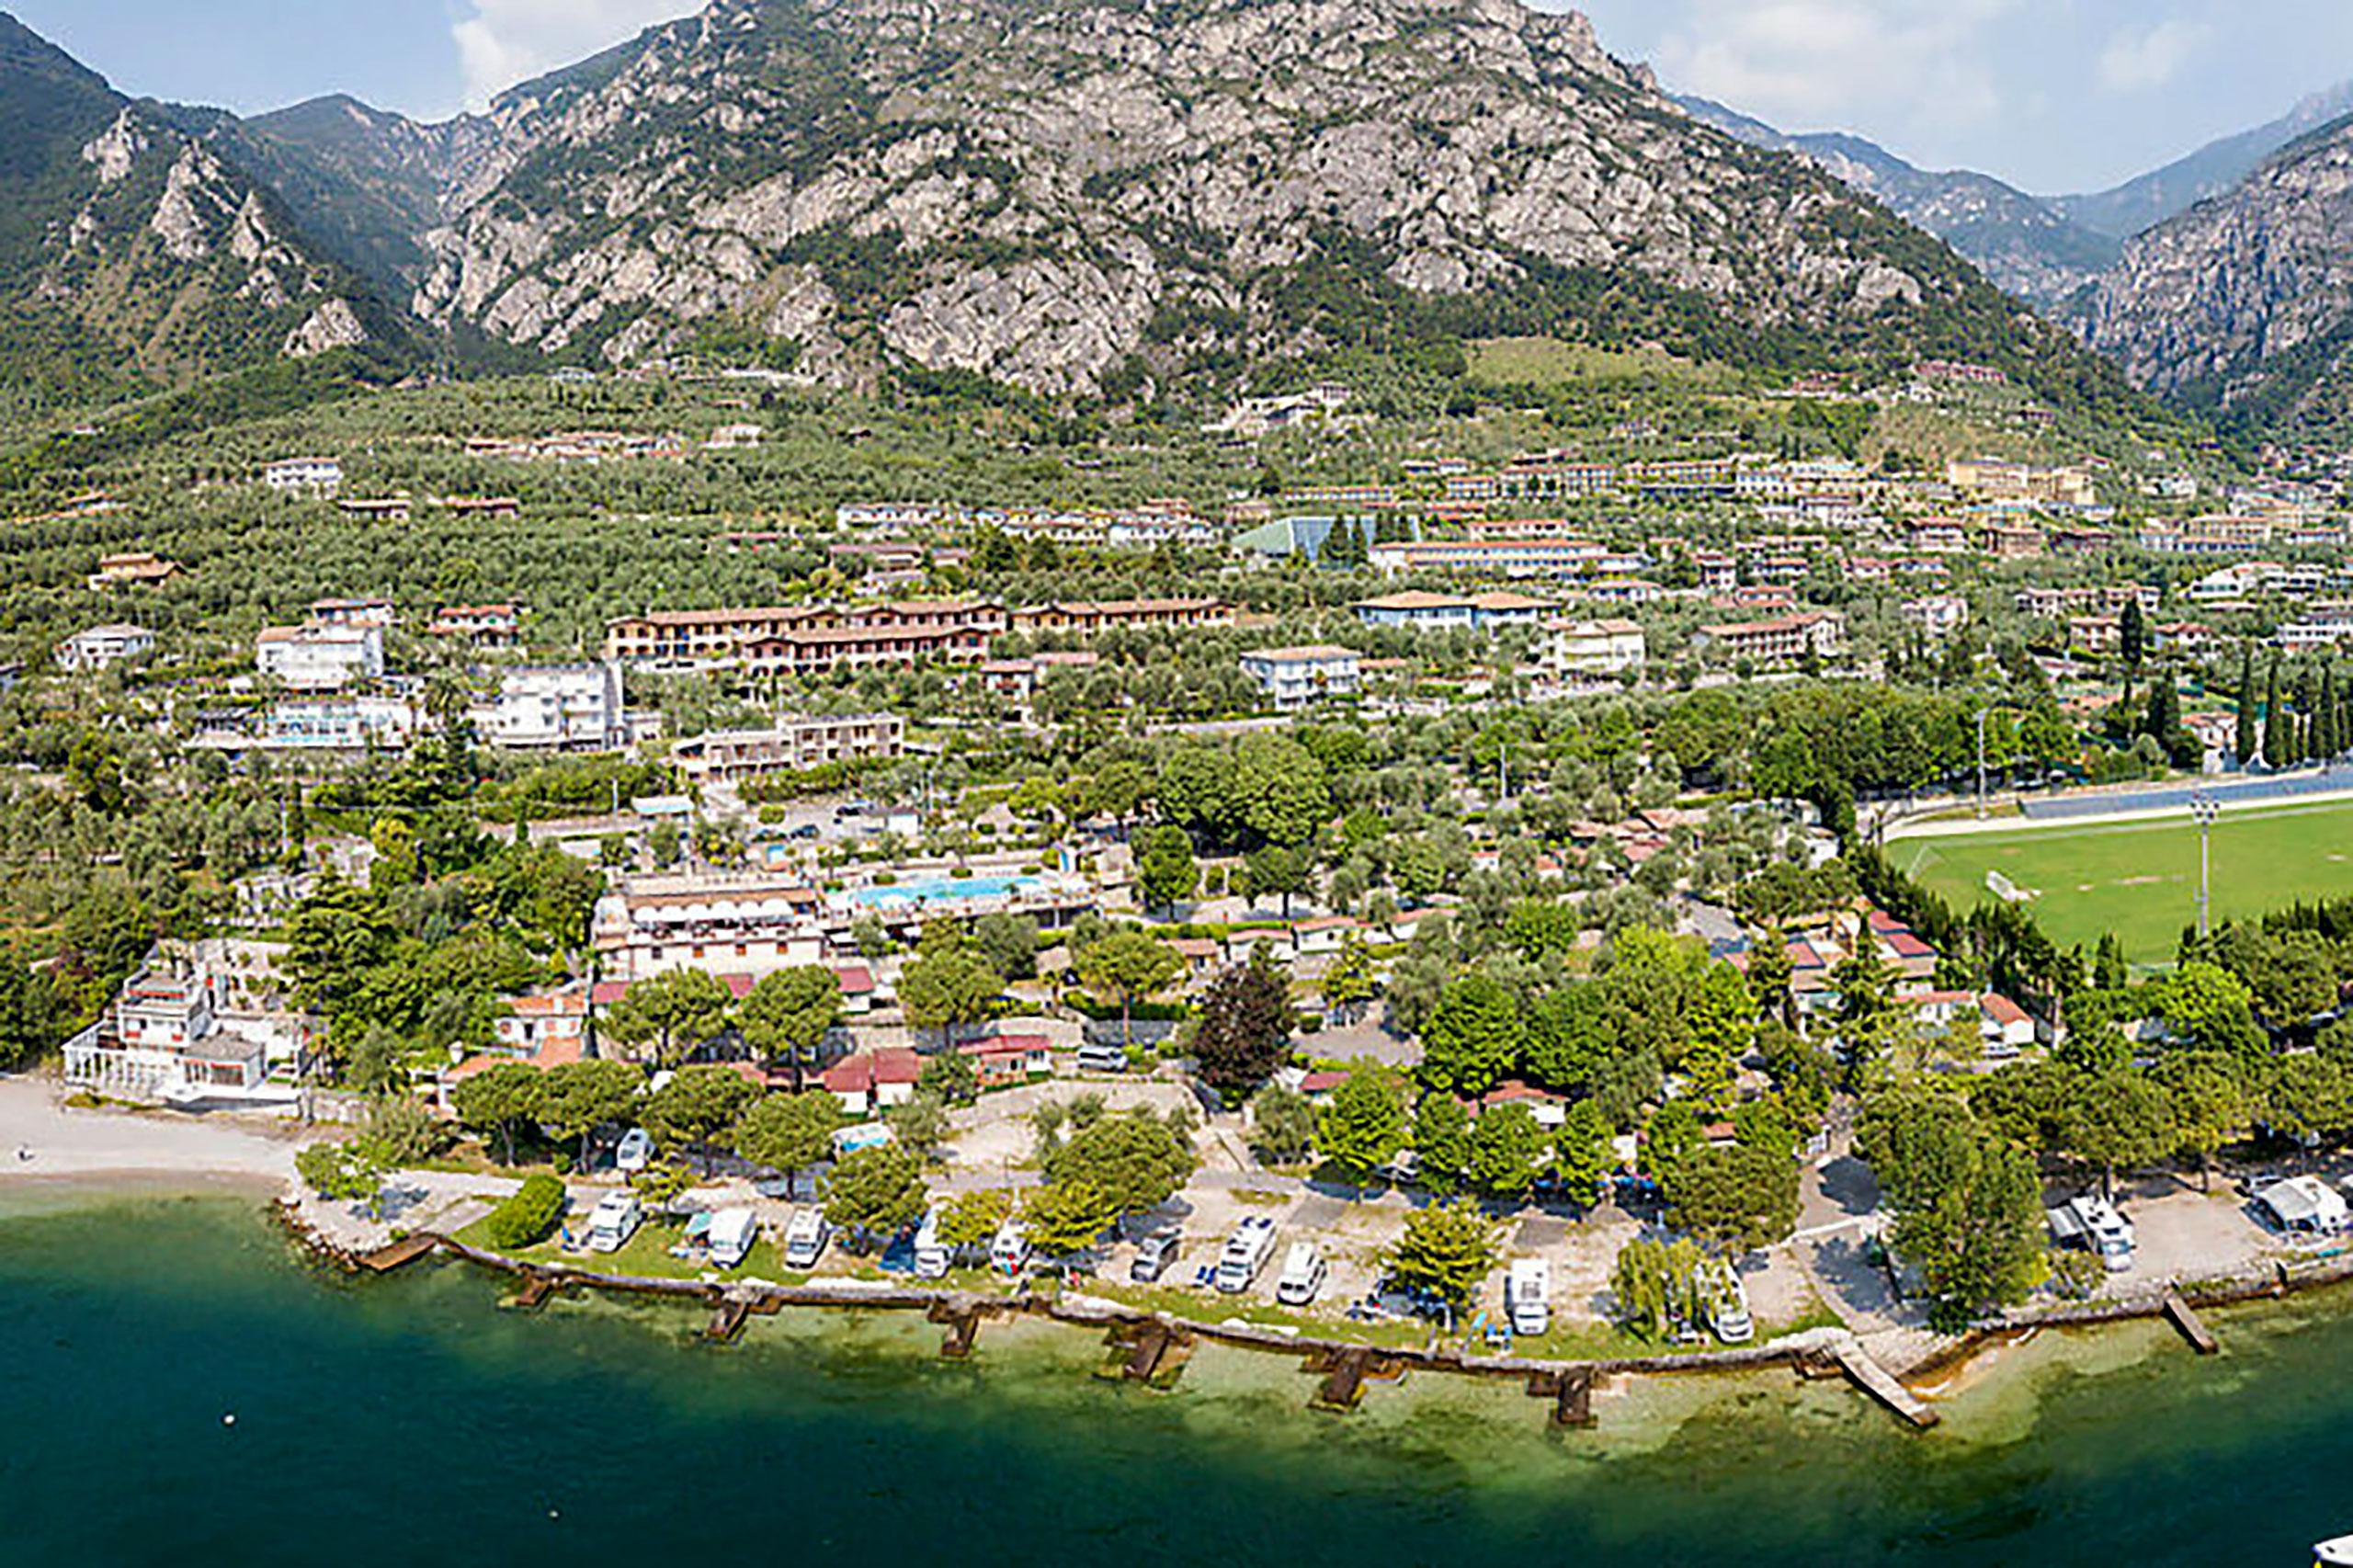  Camping Park Garda is located directly on the lake with a wonderful view. Copyright: Camping Park Garda